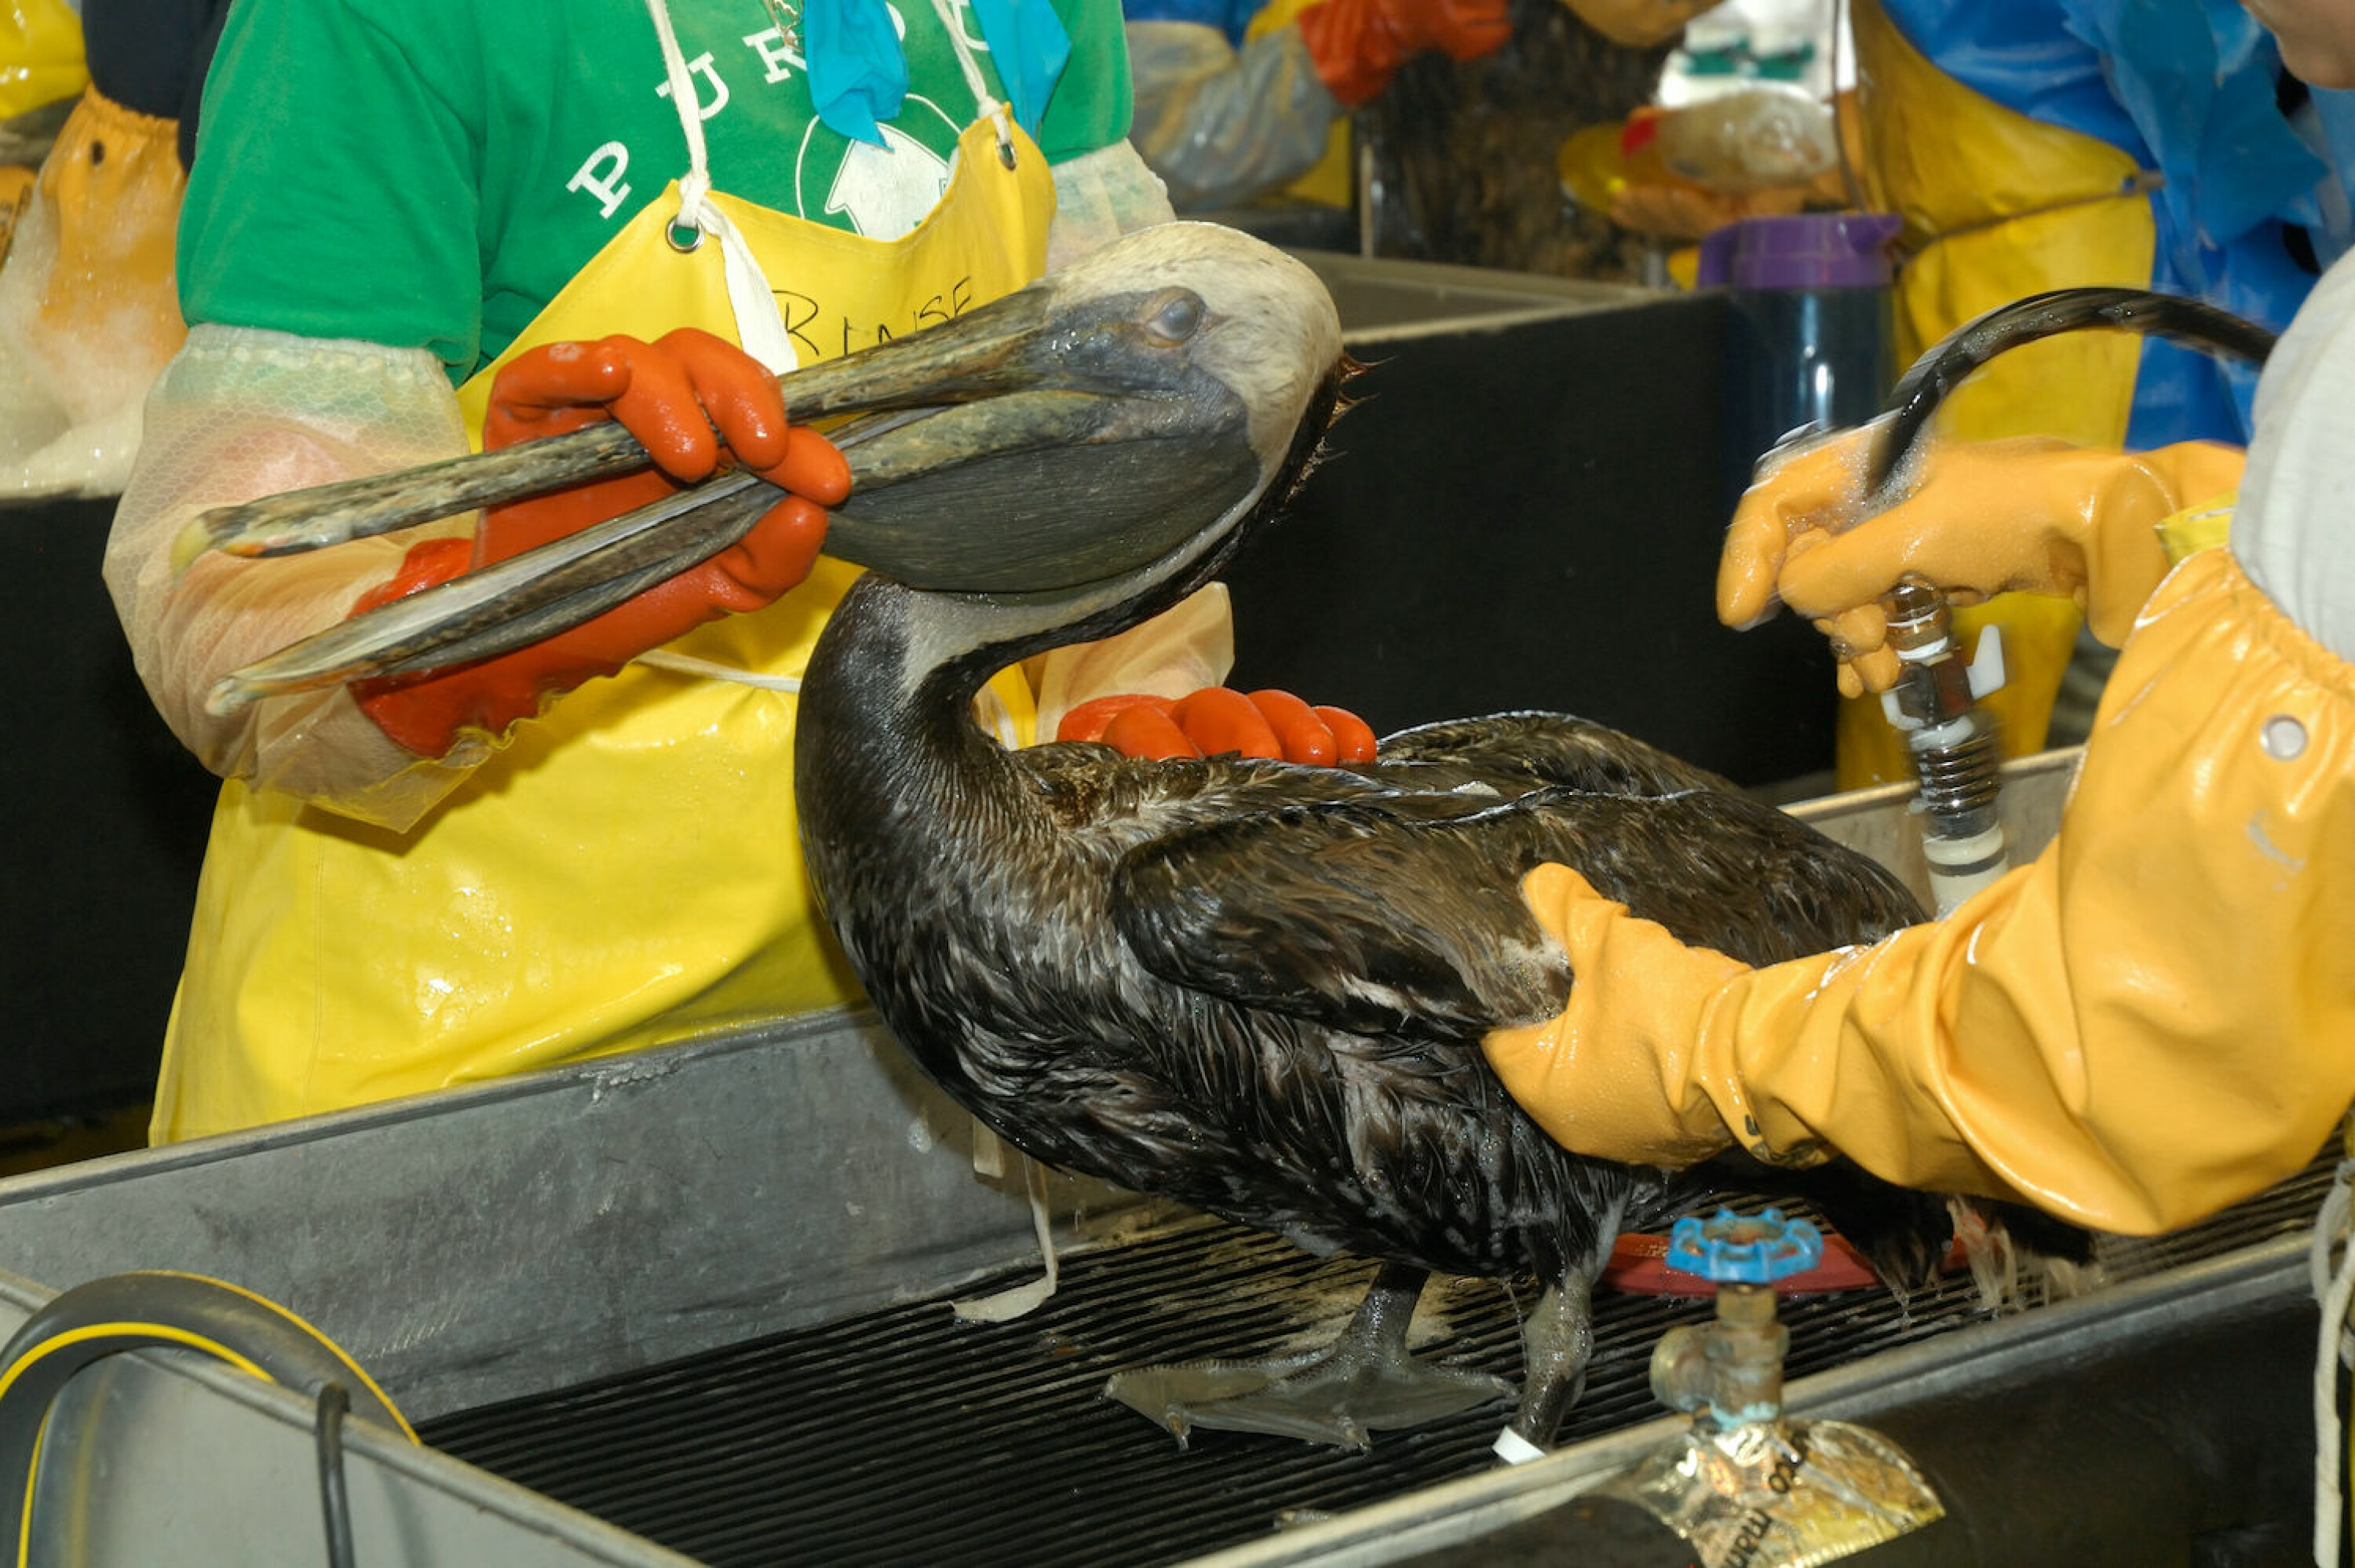 The oil spill from the Deepwater Horizon accident affected marine life and hundreds of birds, like this pelican.